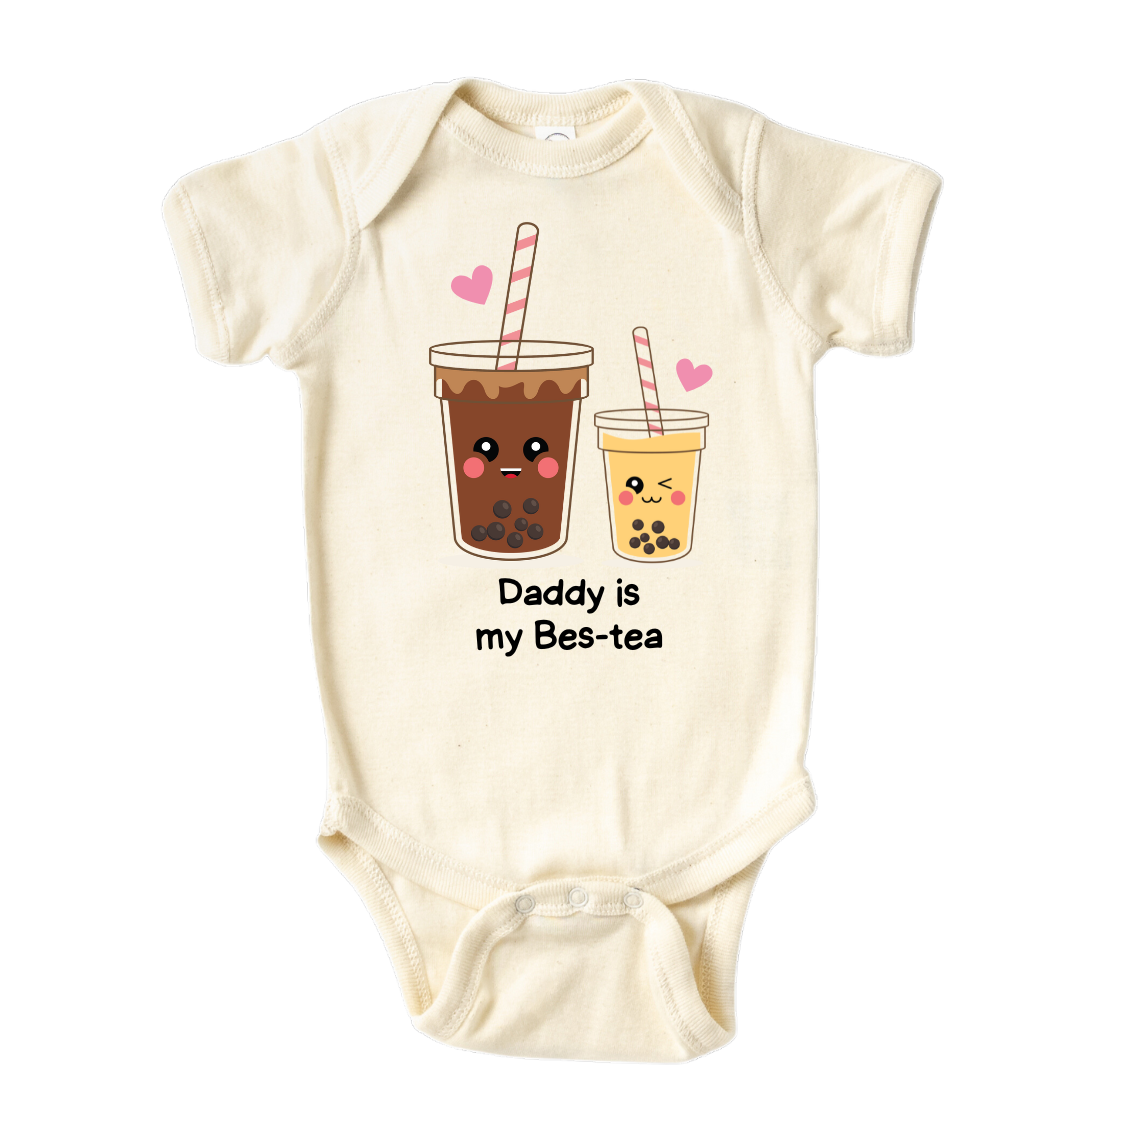 Cute Baby Onesie® Daddy Is My Bes-tea Shirt Baby Clothes Unisex Baby Announcement Gift for Dad